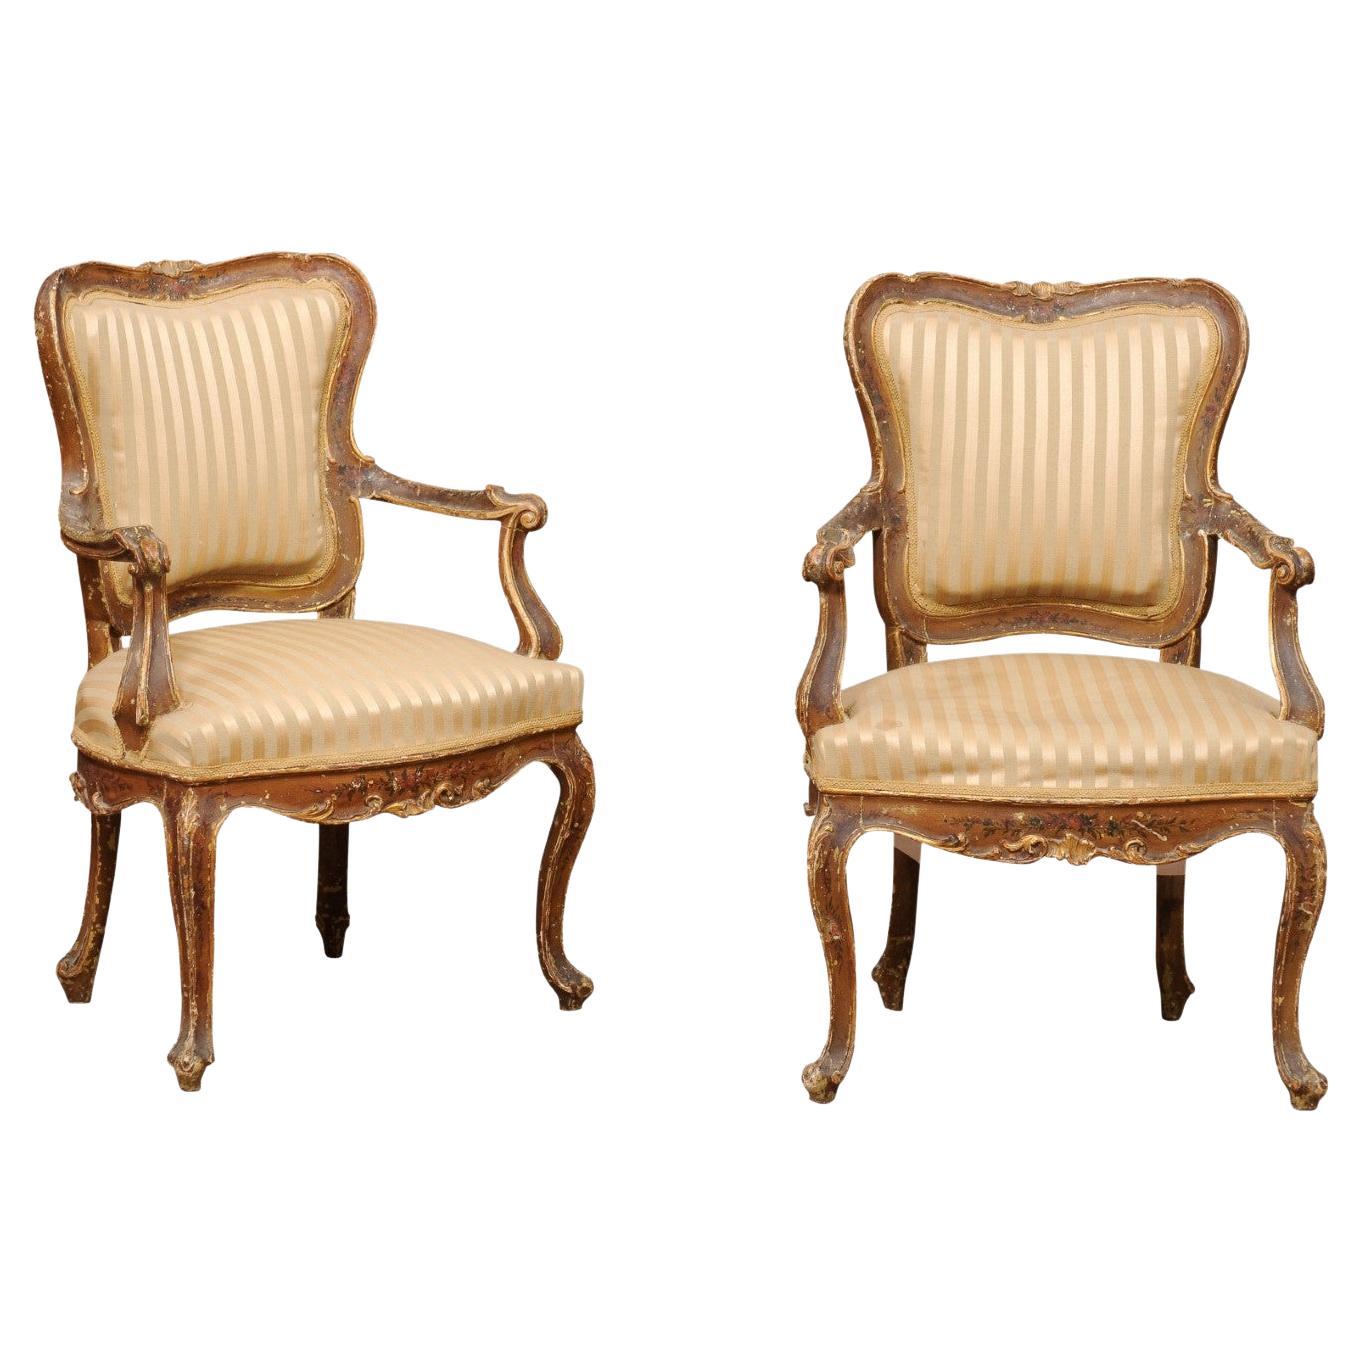 Pair of 19th Century Italian Rococo Painted Armchairs